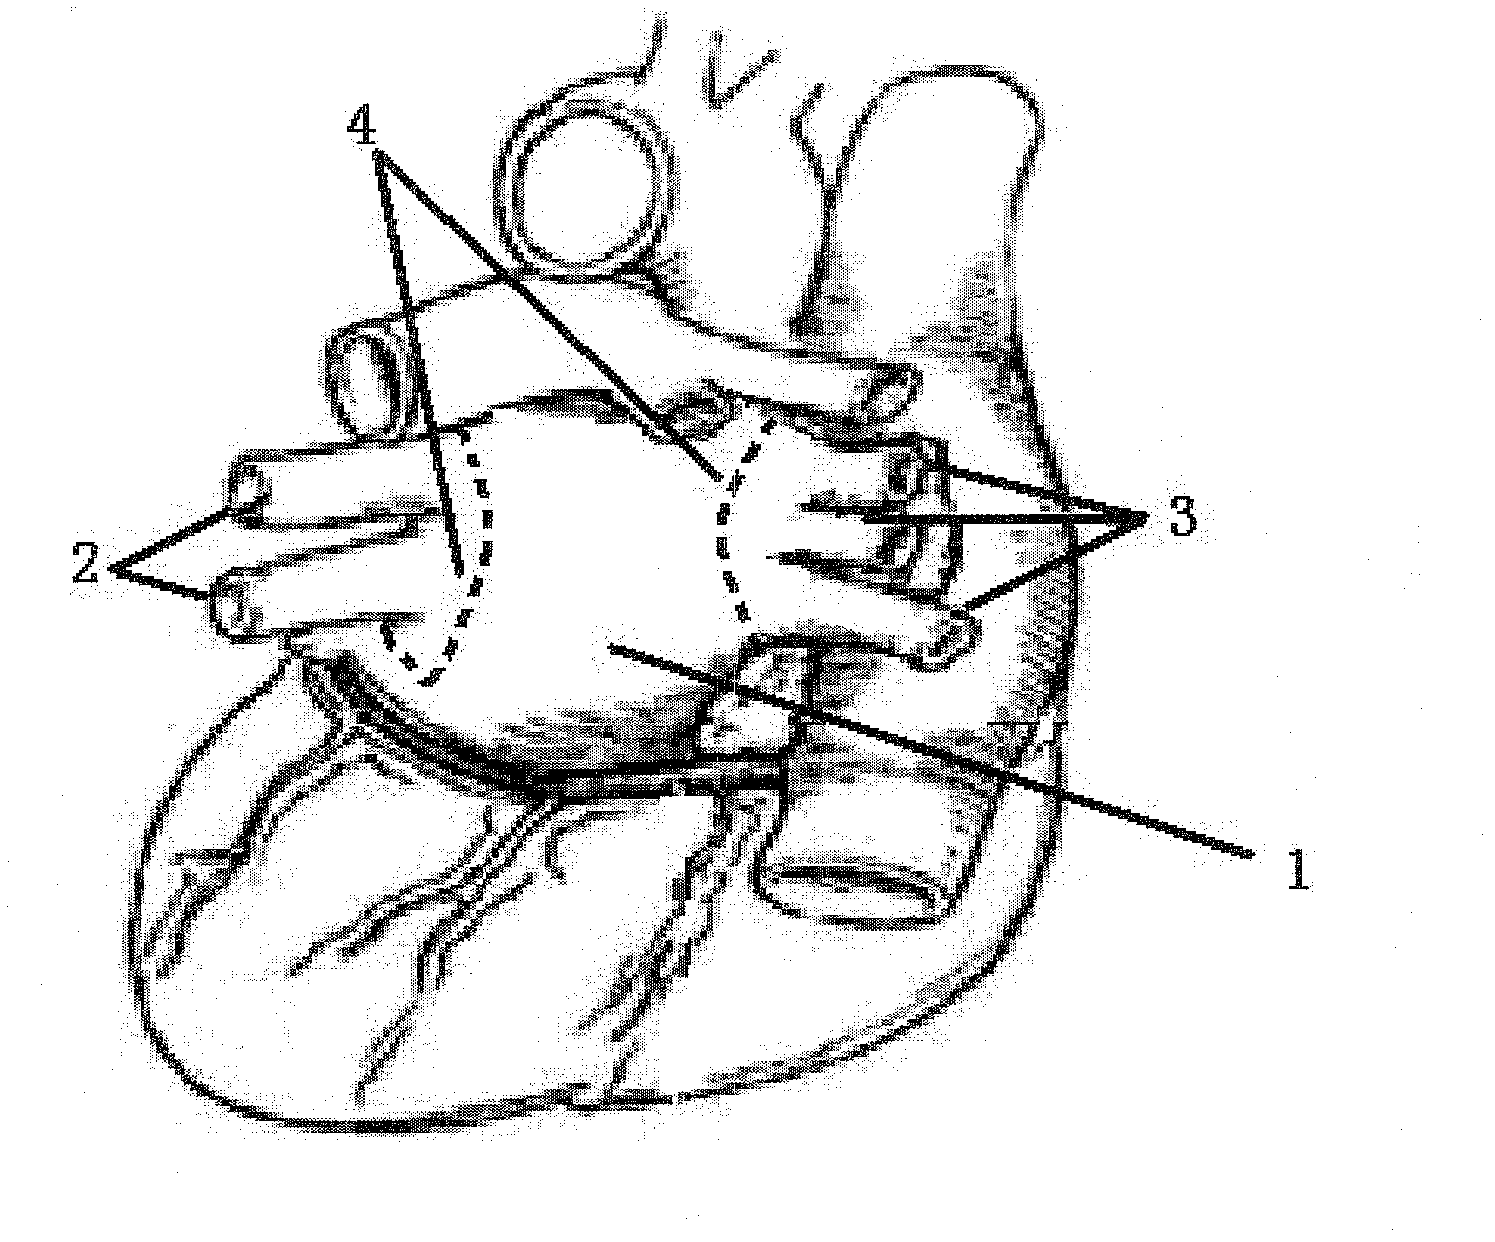 Chemical ablation device used for curing atrial fibrillation